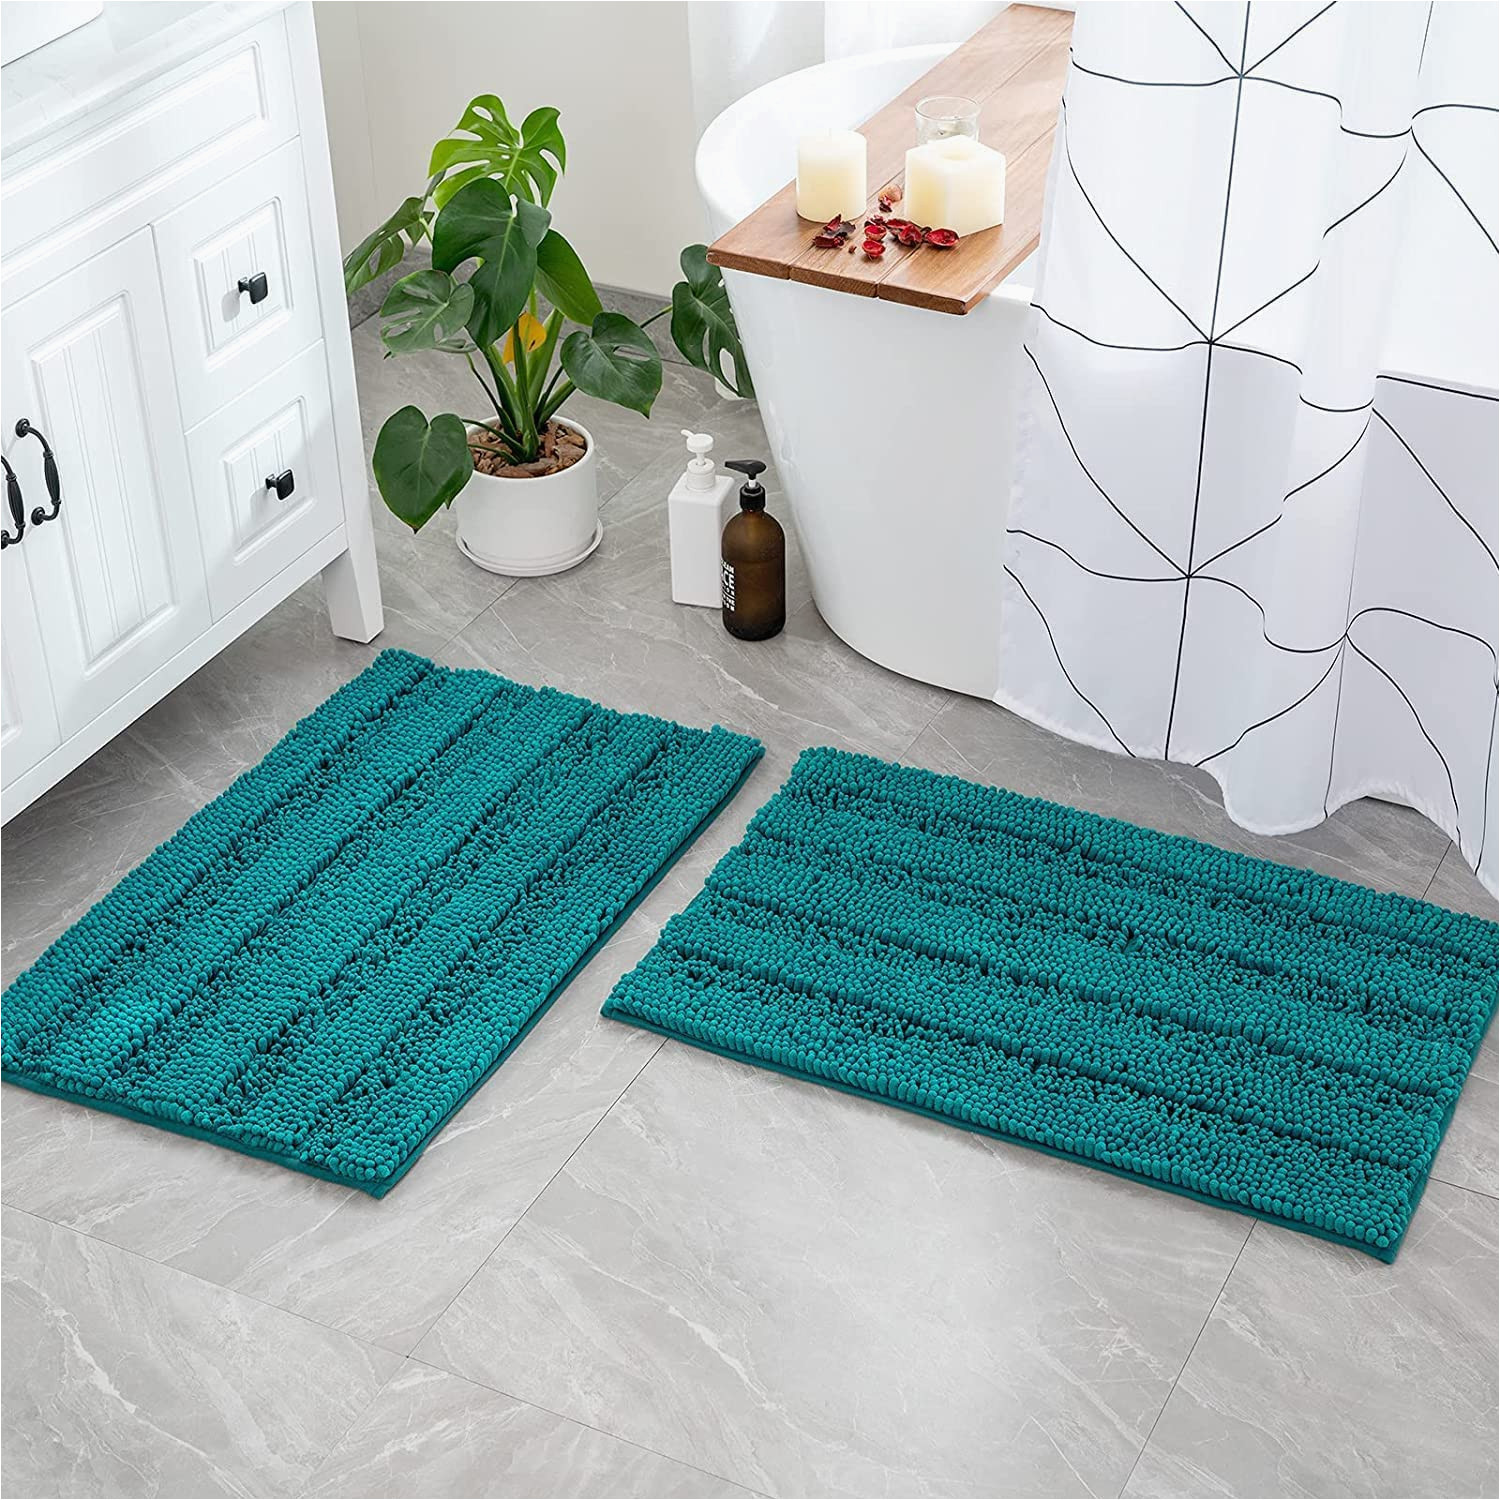 Striped Bath Rug Sets Miulee Set Of 2 Striped Chenille Bathroom Rugs Super soft and Absorbent Non-slip Shaggy Bath Mats Rugs for Bathtub Shower (peacock Blue, 20 X 32 Inch)